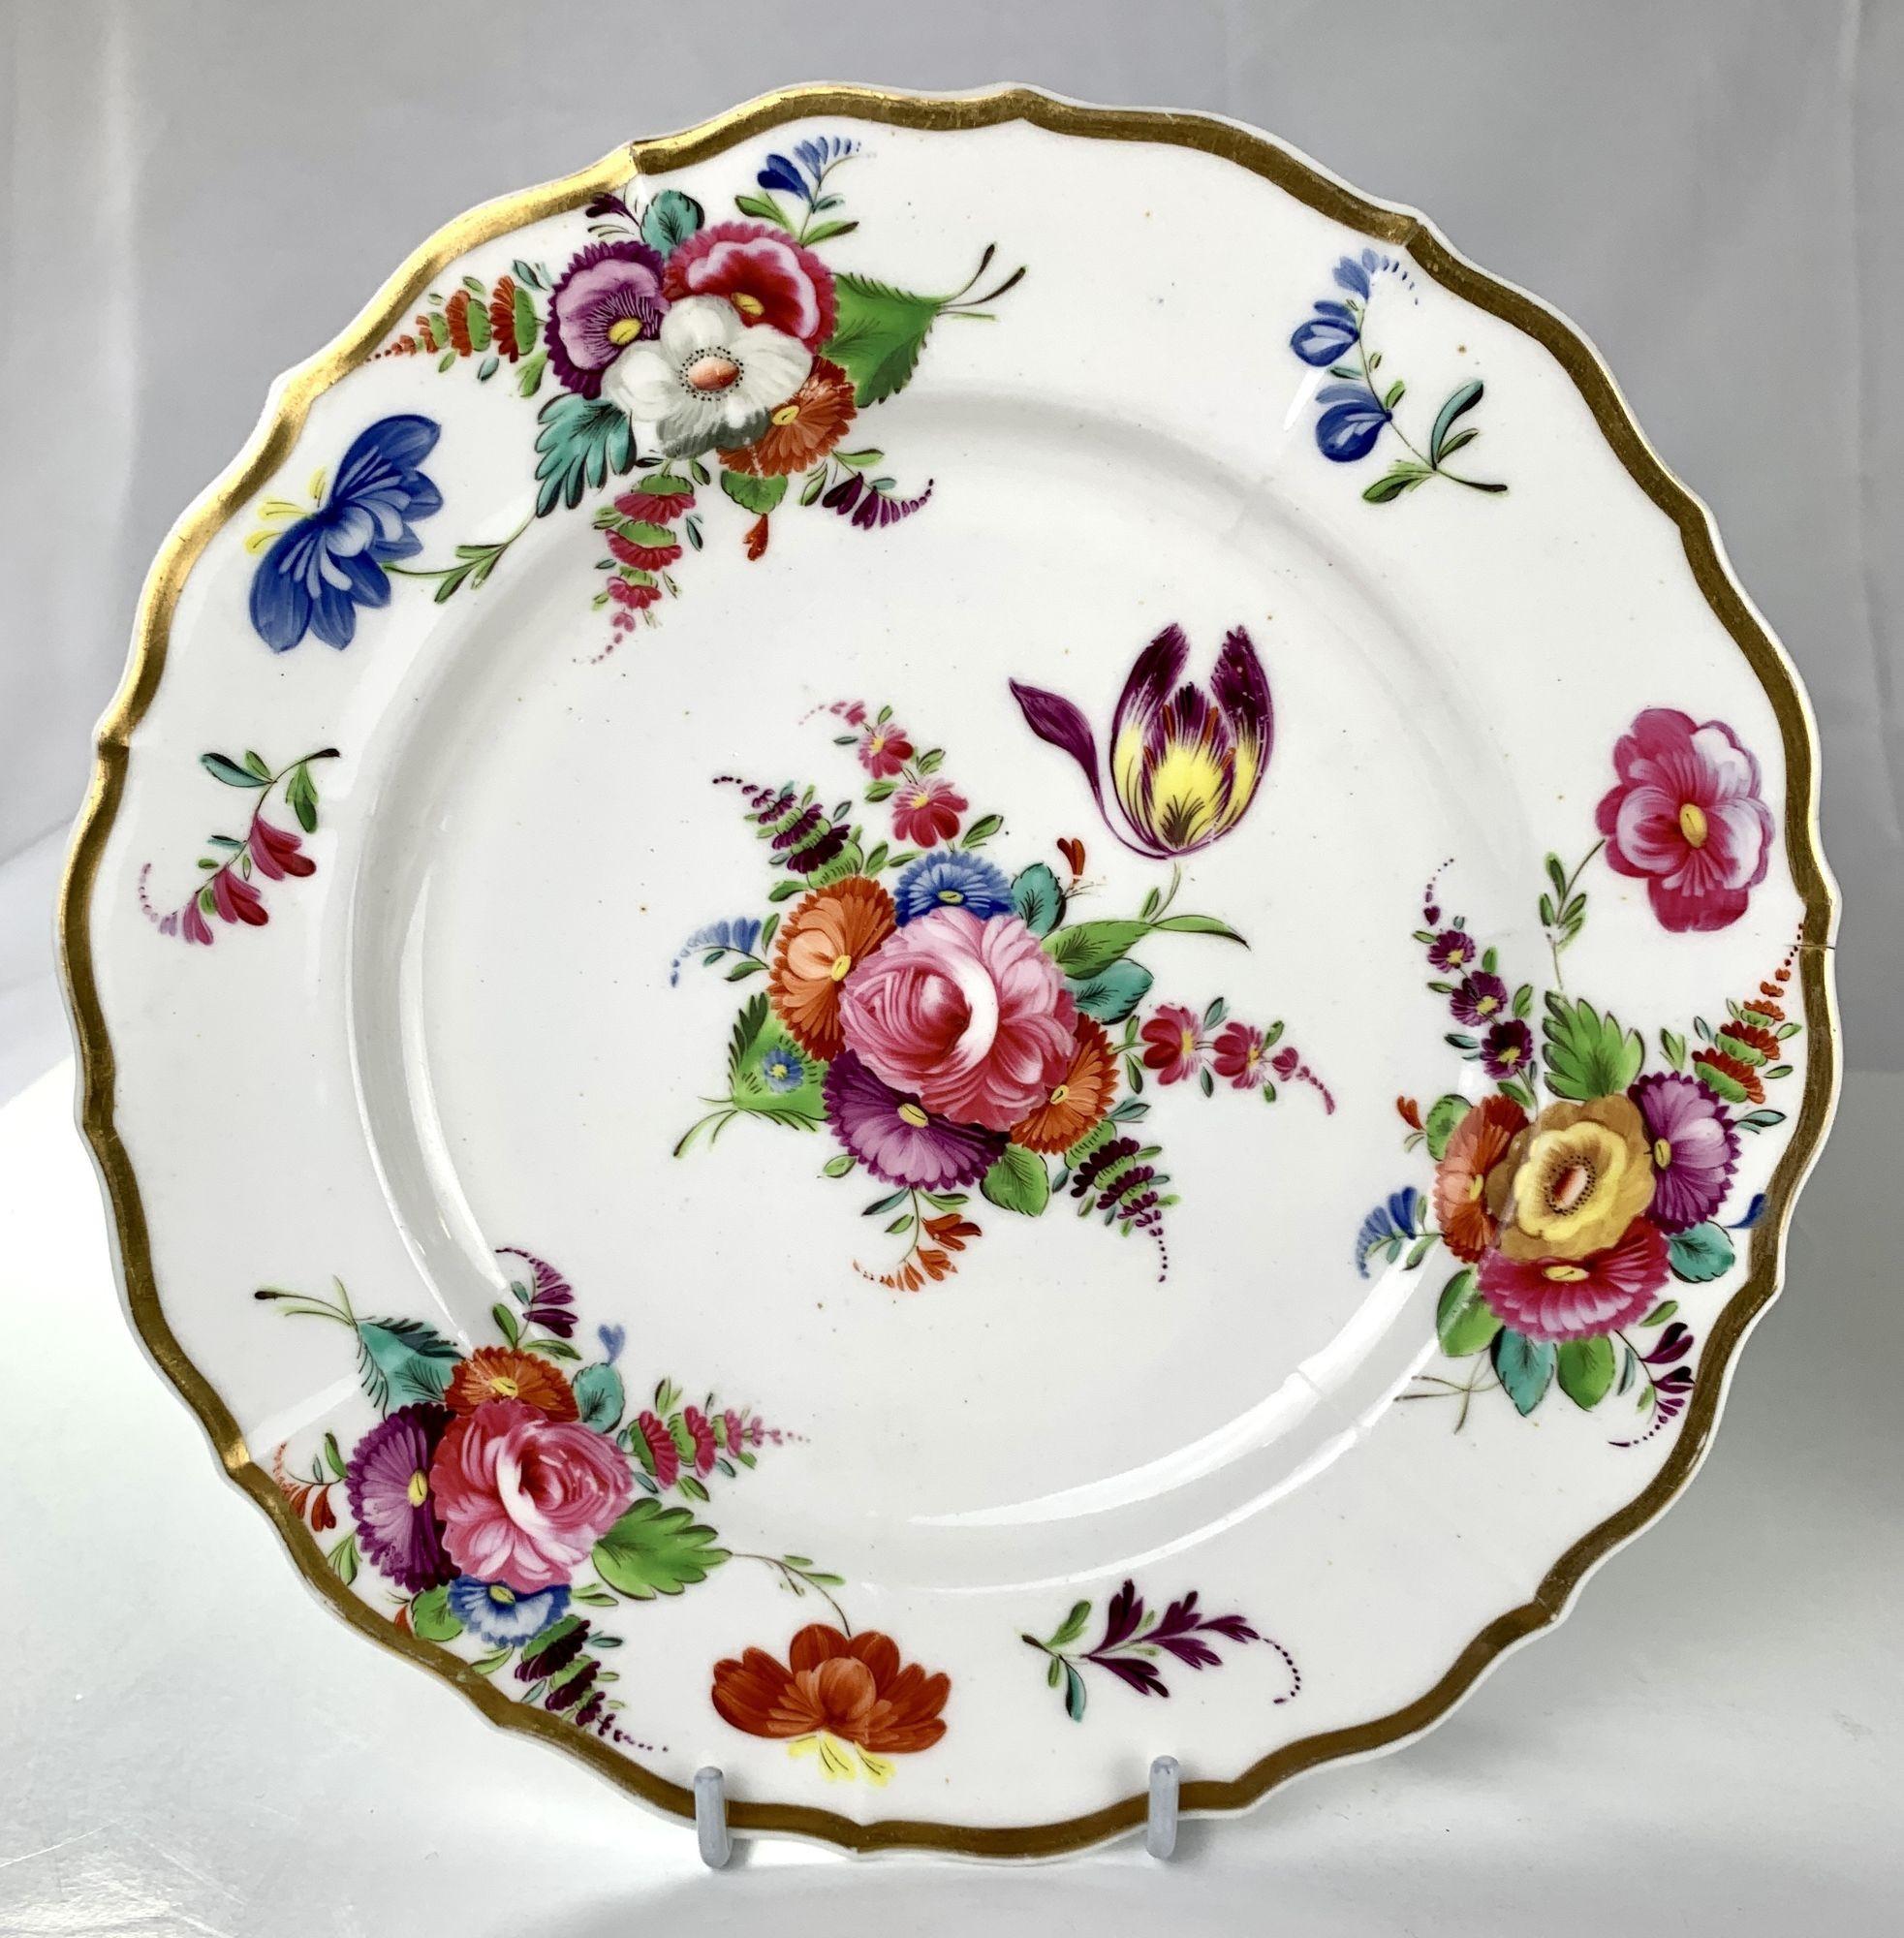 This pair of dishes were hand-painted at Coalport in England in the early 19th century. 
The colors are fabulous; we see pink, purple, orange, blue, green, yellow, and turquoise.
Flowers are everywhere; beautiful roses, forget-me-nots,